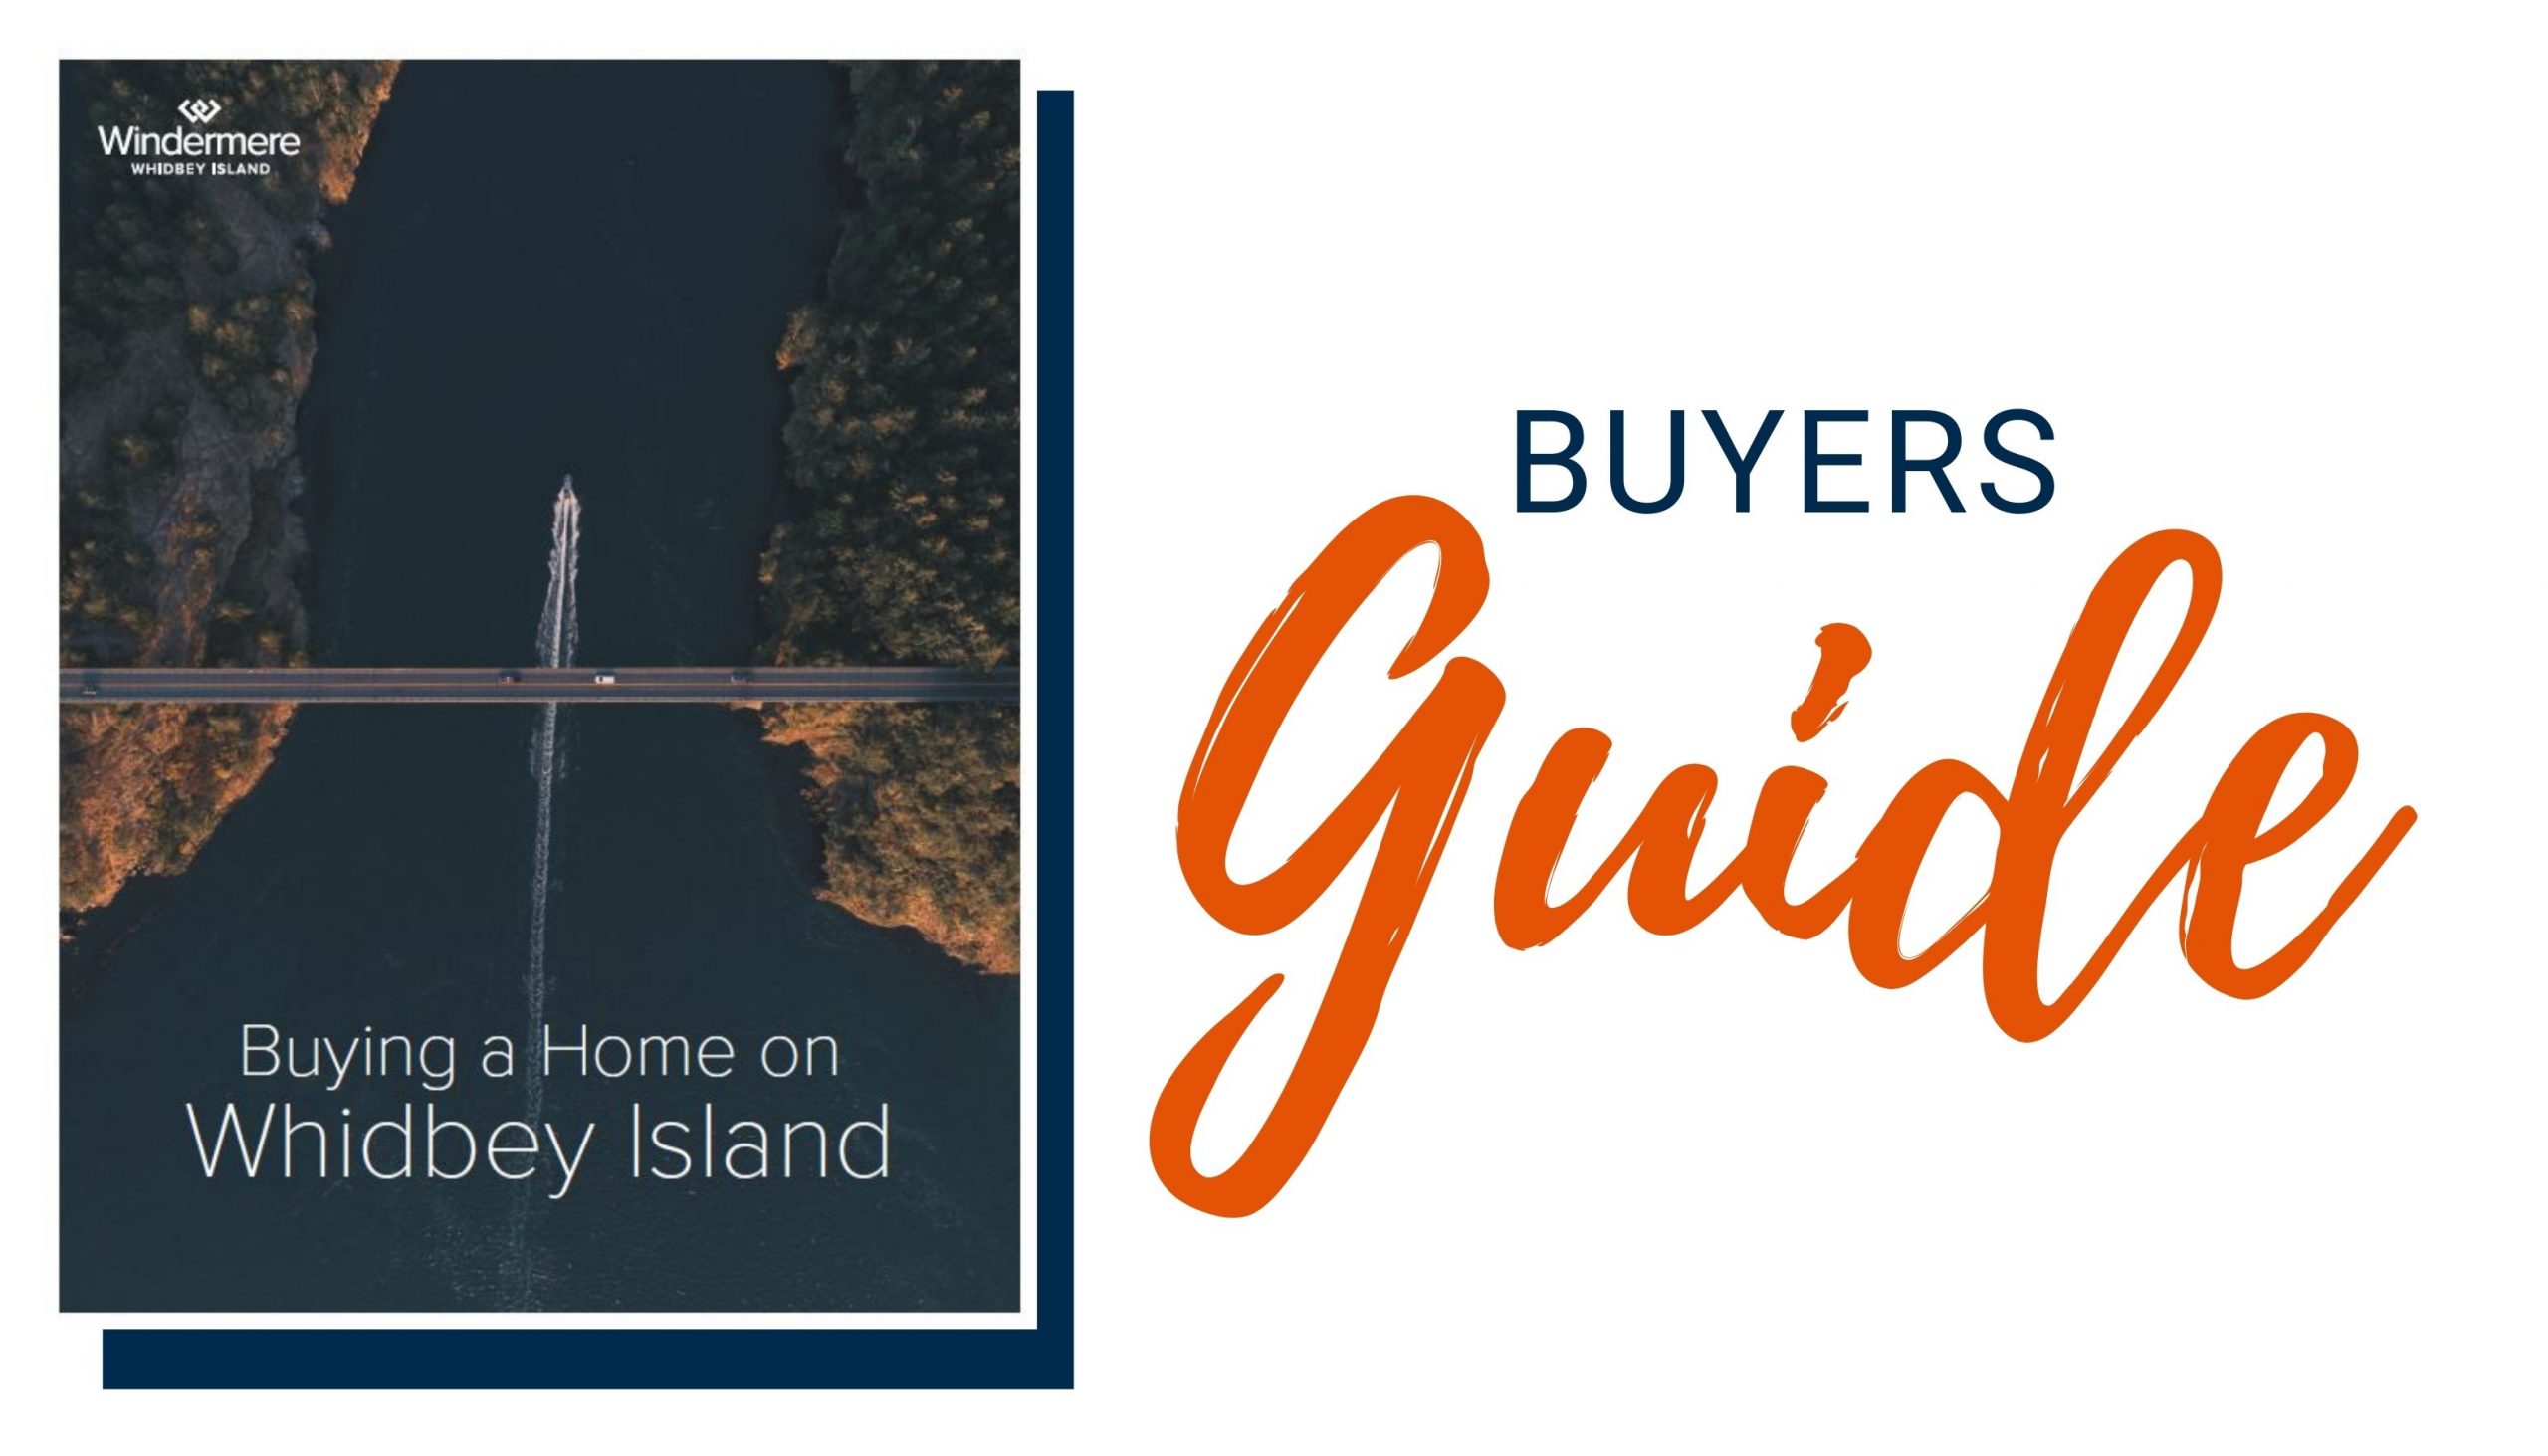 Buyers Guides, Buyer, Guide to buying a home on Whidbey Island, Real Estate, First Time home buyer, Whidbey Island Realty, PNW